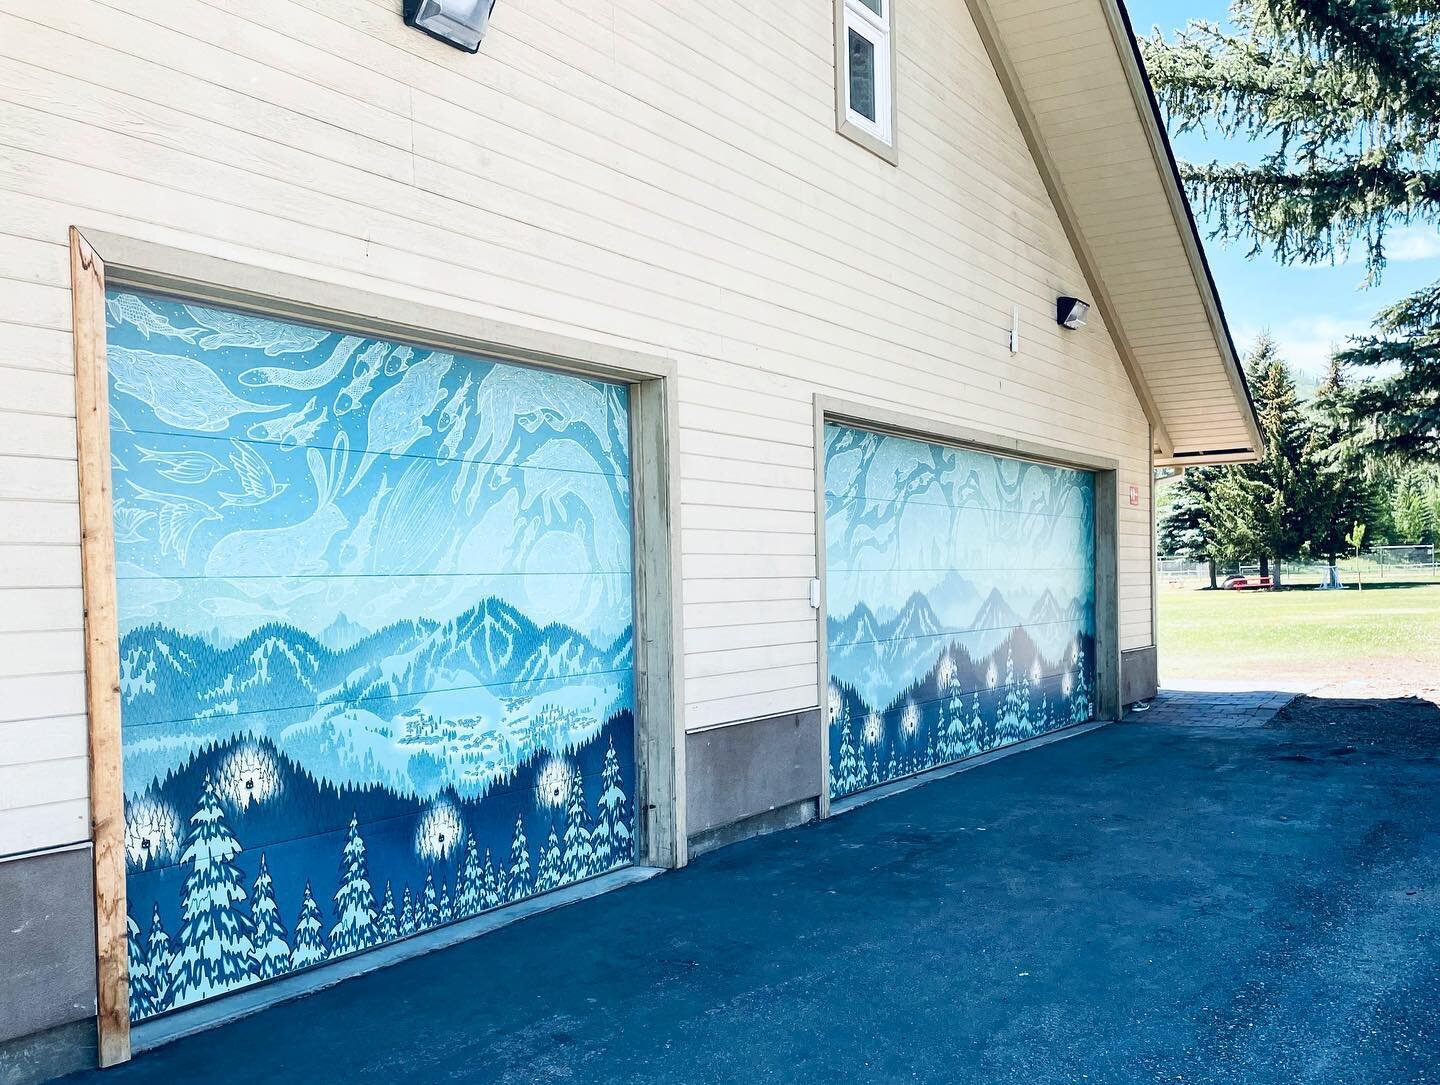 Wrapped garage doors for the City of Ketchum Recreation Department. Love how these turned out!! 

#windycitysv #recreation #explore #fun #custom #sunvalley #ketchum #woodrivervalley